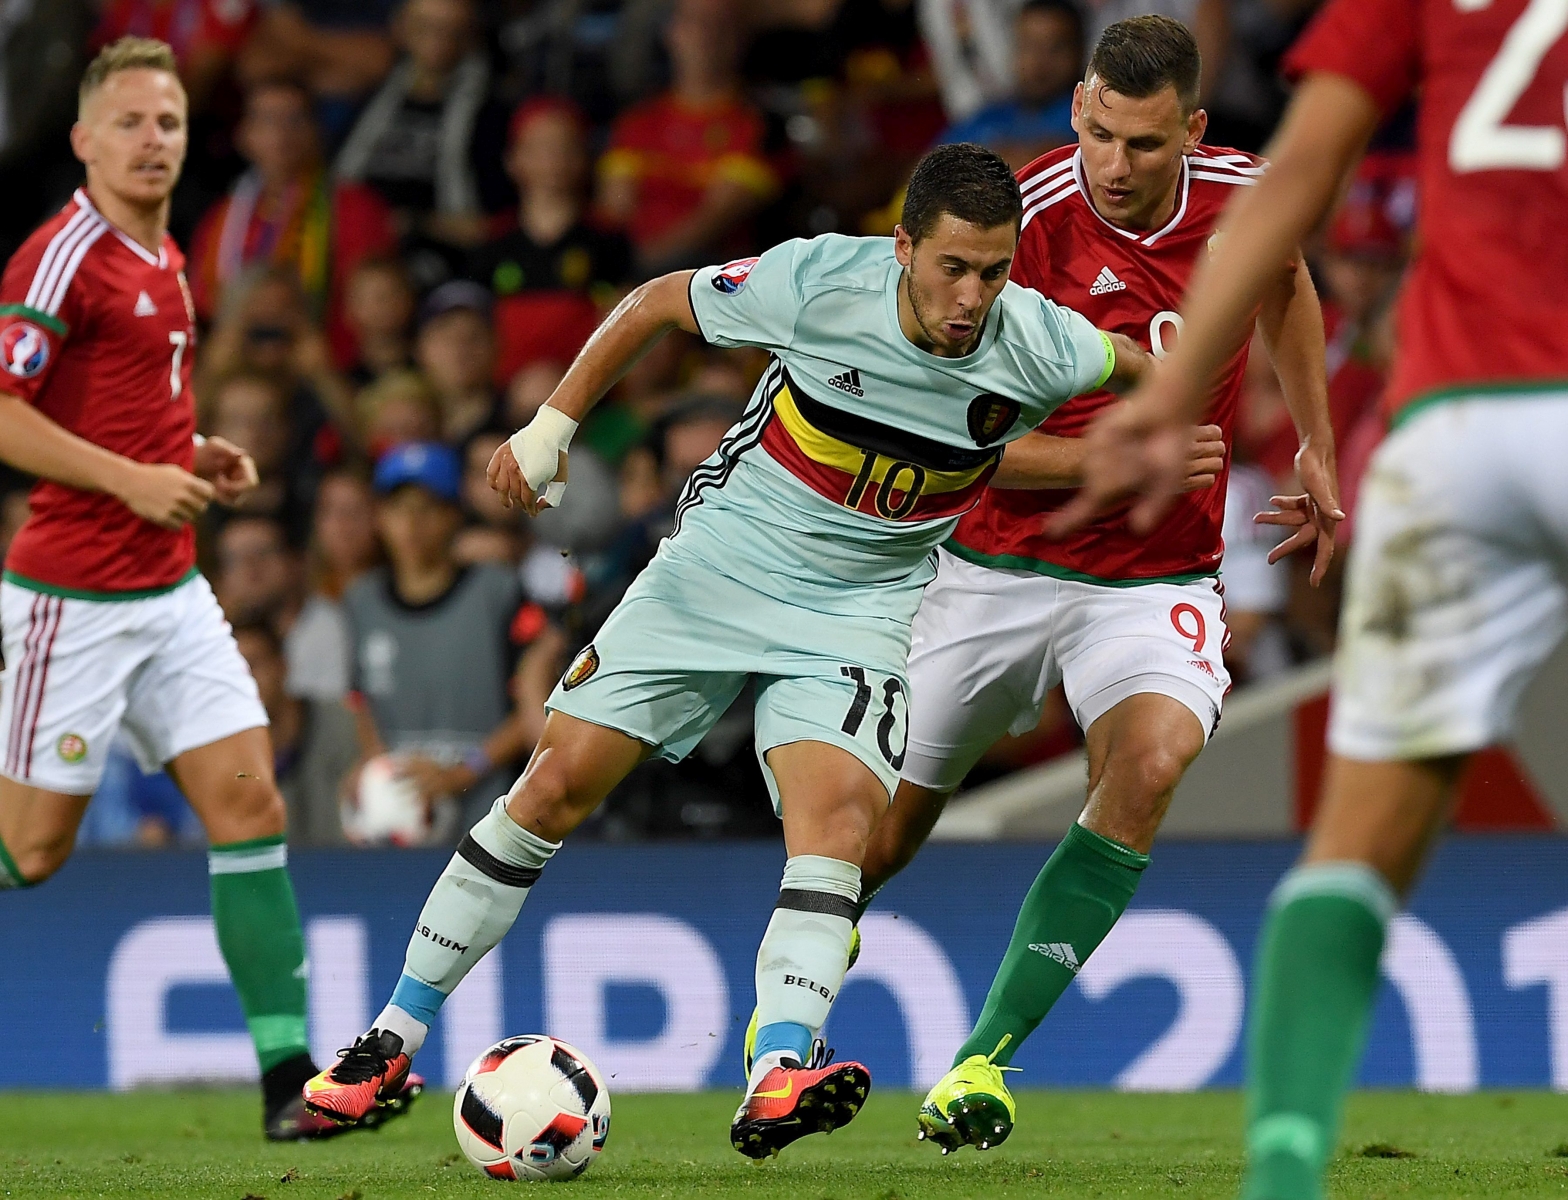 epa05393273 Adam Szalai of Hungary (R) and Eden Hazard of Belgium in action during the UEFA EURO 2016 round of 16 match between Hungary and Belgium at Stade Municipal in Toulouse, France, 26 June 2016.......(RESTRICTIONS APPLY: For editorial news reporting purposes only. Not used for commercial or marketing purposes without prior written approval of UEFA. Images must appear as still images and must not emulate match action video footage. Photographs published in online publications (whether via the Internet or otherwise) shall have an interval of at least 20 seconds between the posting.)  EPA/VASSIL DONEV   EDITORIAL USE ONLY